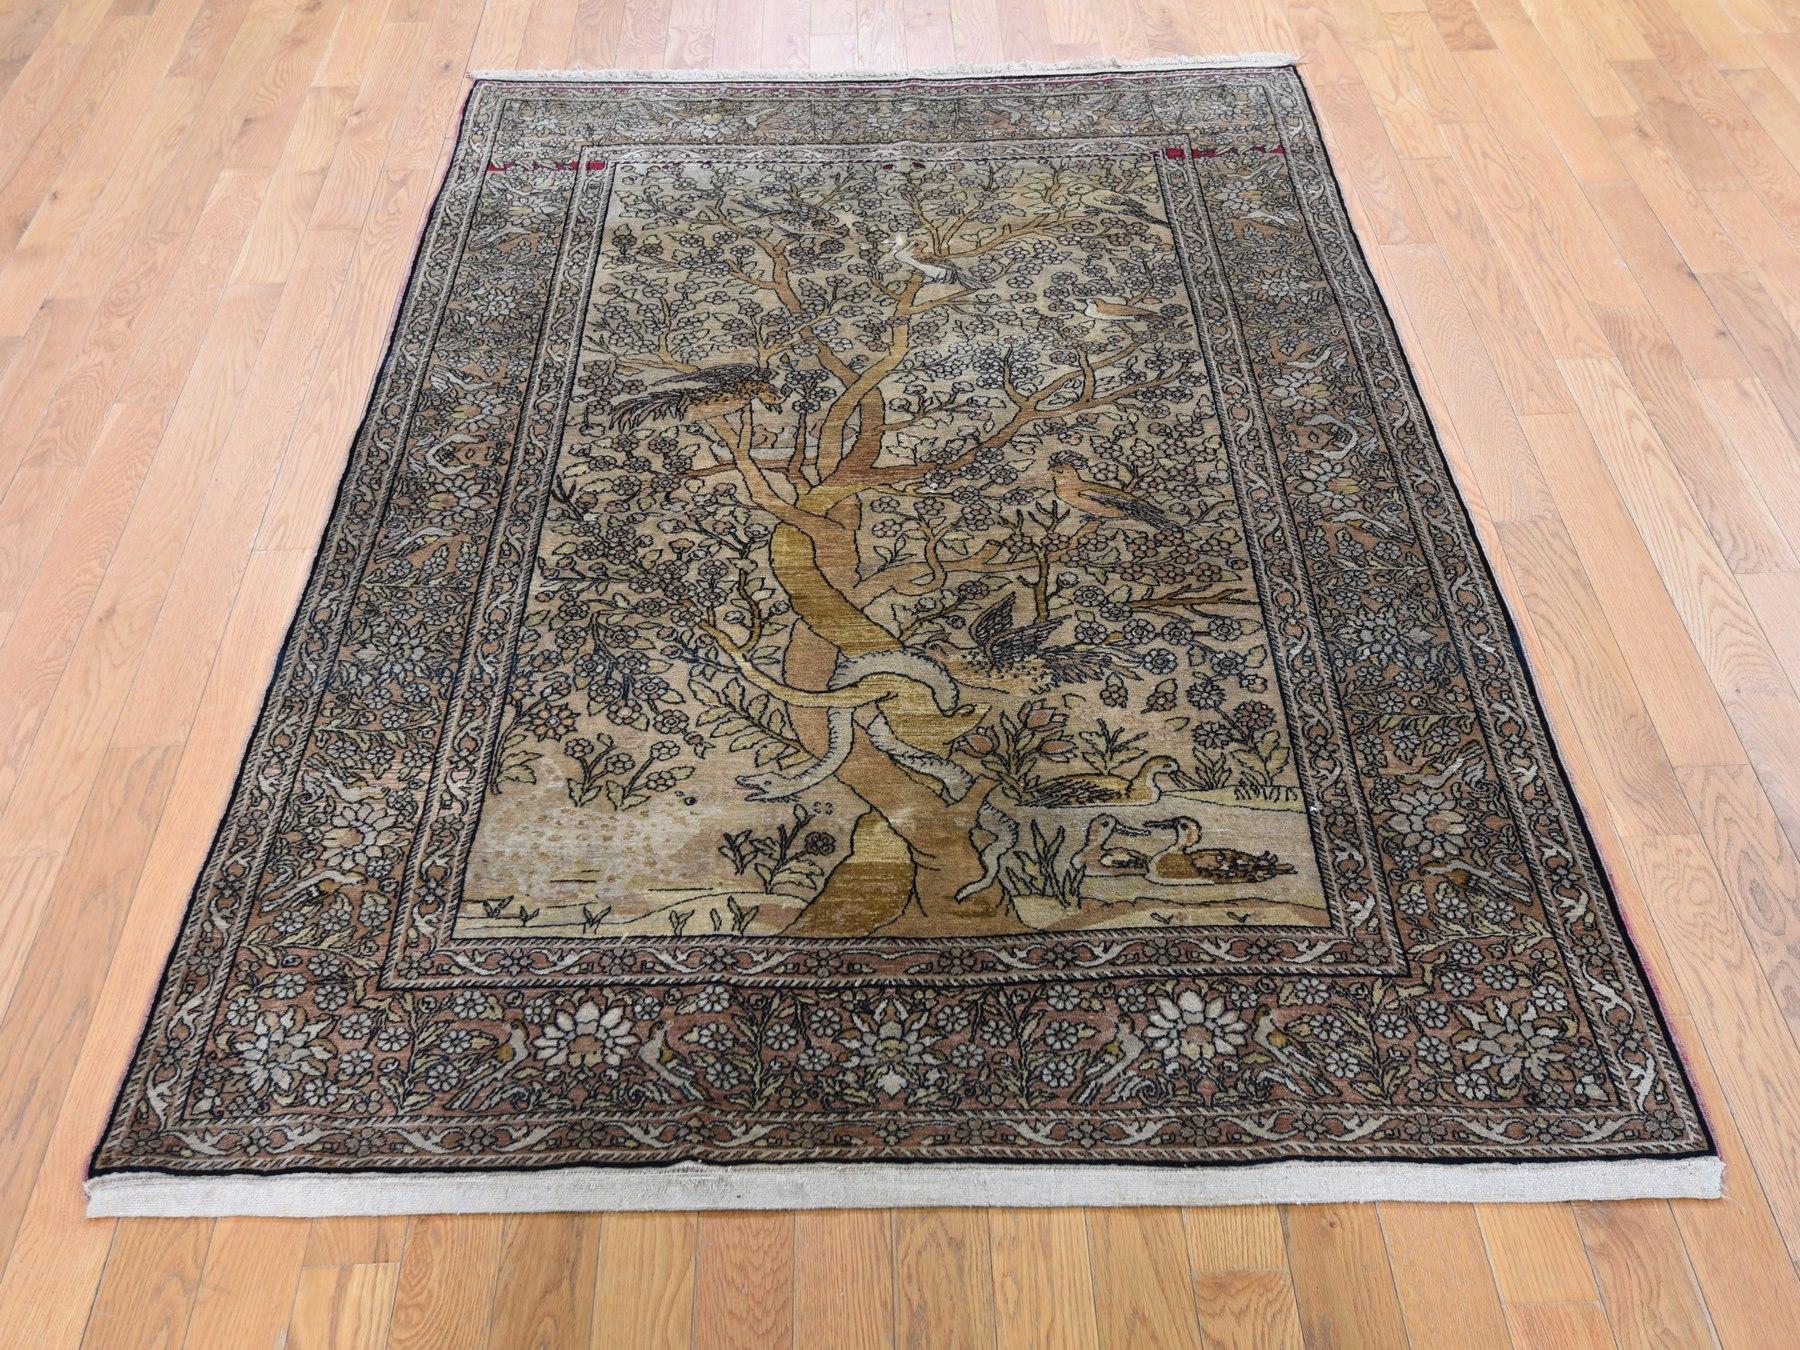 This is a truly genuine one-of-a-kind gold antique Persian Isfahan Tree Of Life hand knotted Oriental rug. It has been knotted for months and months in the centuries-old Persian weaving craftsmanship techniques by expert artisans. 

Primary